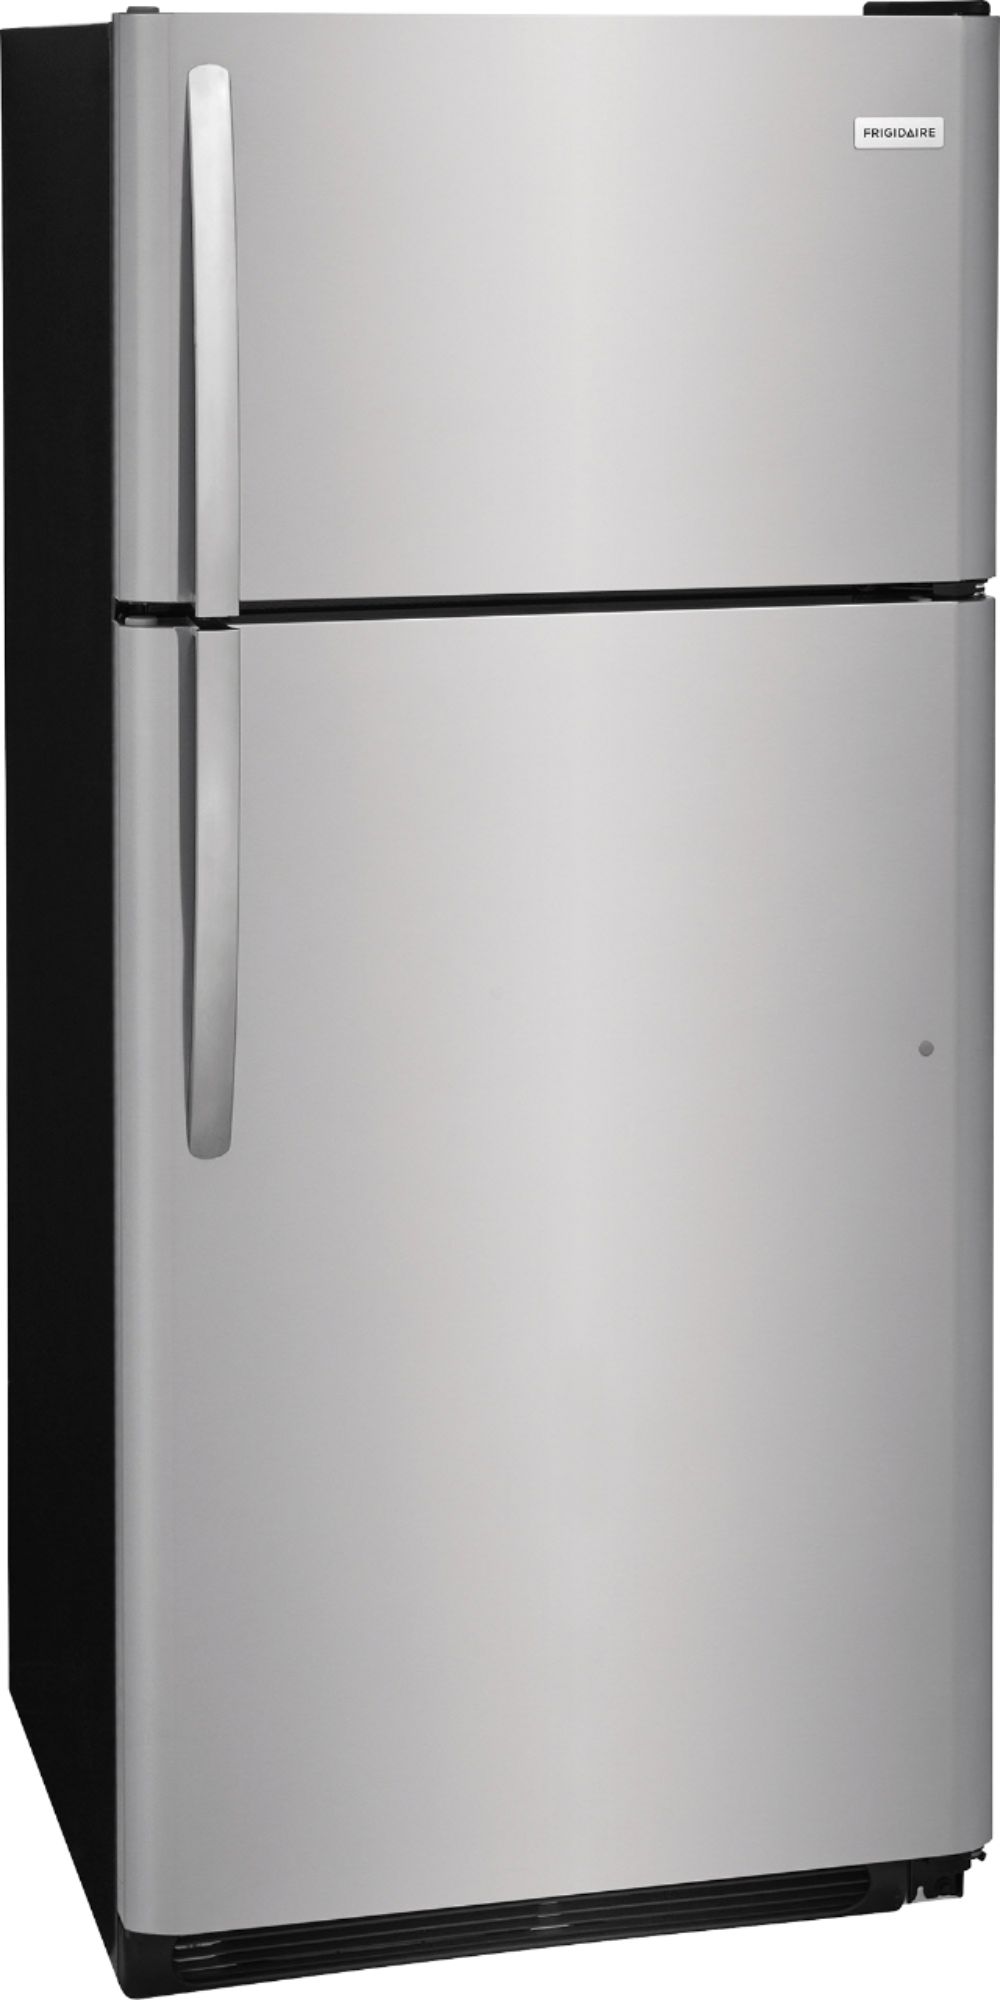 Angle View: Frigidaire - 25.6 Cu. Ft. Side-by-Side Refrigerator - Pearl